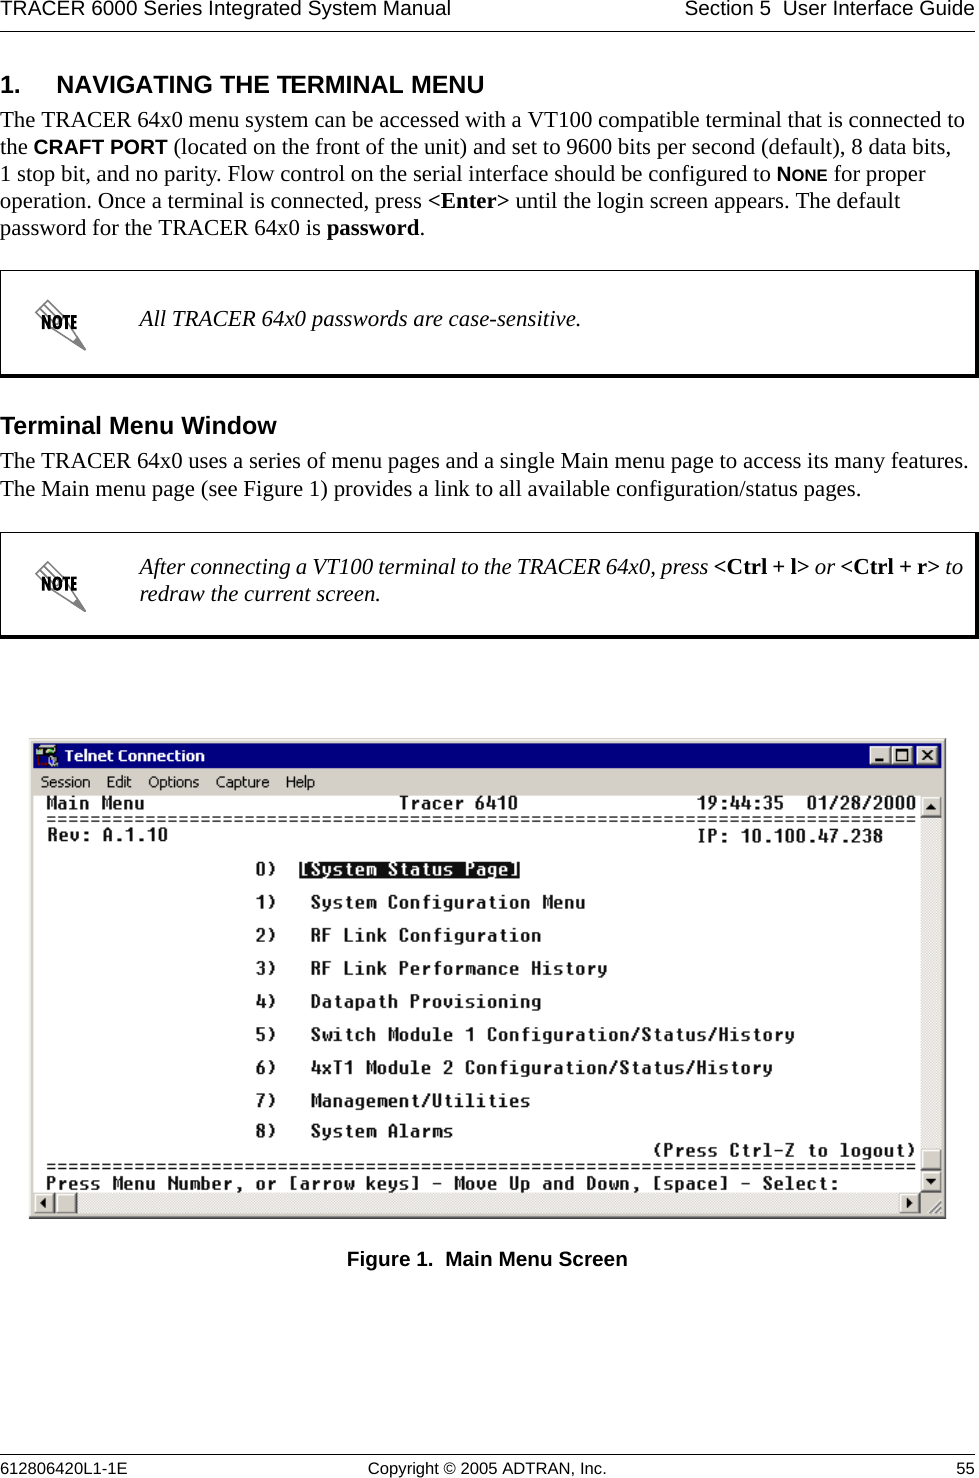 TRACER 6000 Series Integrated System Manual Section 5  User Interface Guide612806420L1-1E Copyright © 2005 ADTRAN, Inc. 551. NAVIGATING THE TERMINAL MENUThe TRACER 64x0 menu system can be accessed with a VT100 compatible terminal that is connected to the CRAFT PORT (located on the front of the unit) and set to 9600 bits per second (default), 8 data bits, 1 stop bit, and no parity. Flow control on the serial interface should be configured to NONE for proper operation. Once a terminal is connected, press &lt;Enter&gt; until the login screen appears. The default password for the TRACER 64x0 is password.Terminal Menu WindowThe TRACER 64x0 uses a series of menu pages and a single Main menu page to access its many features. The Main menu page (see Figure 1) provides a link to all available configuration/status pages.Figure 1.  Main Menu ScreenAll TRACER 64x0 passwords are case-sensitive.After connecting a VT100 terminal to the TRACER 64x0, press &lt;Ctrl + l&gt; or &lt;Ctrl + r&gt; to redraw the current screen.